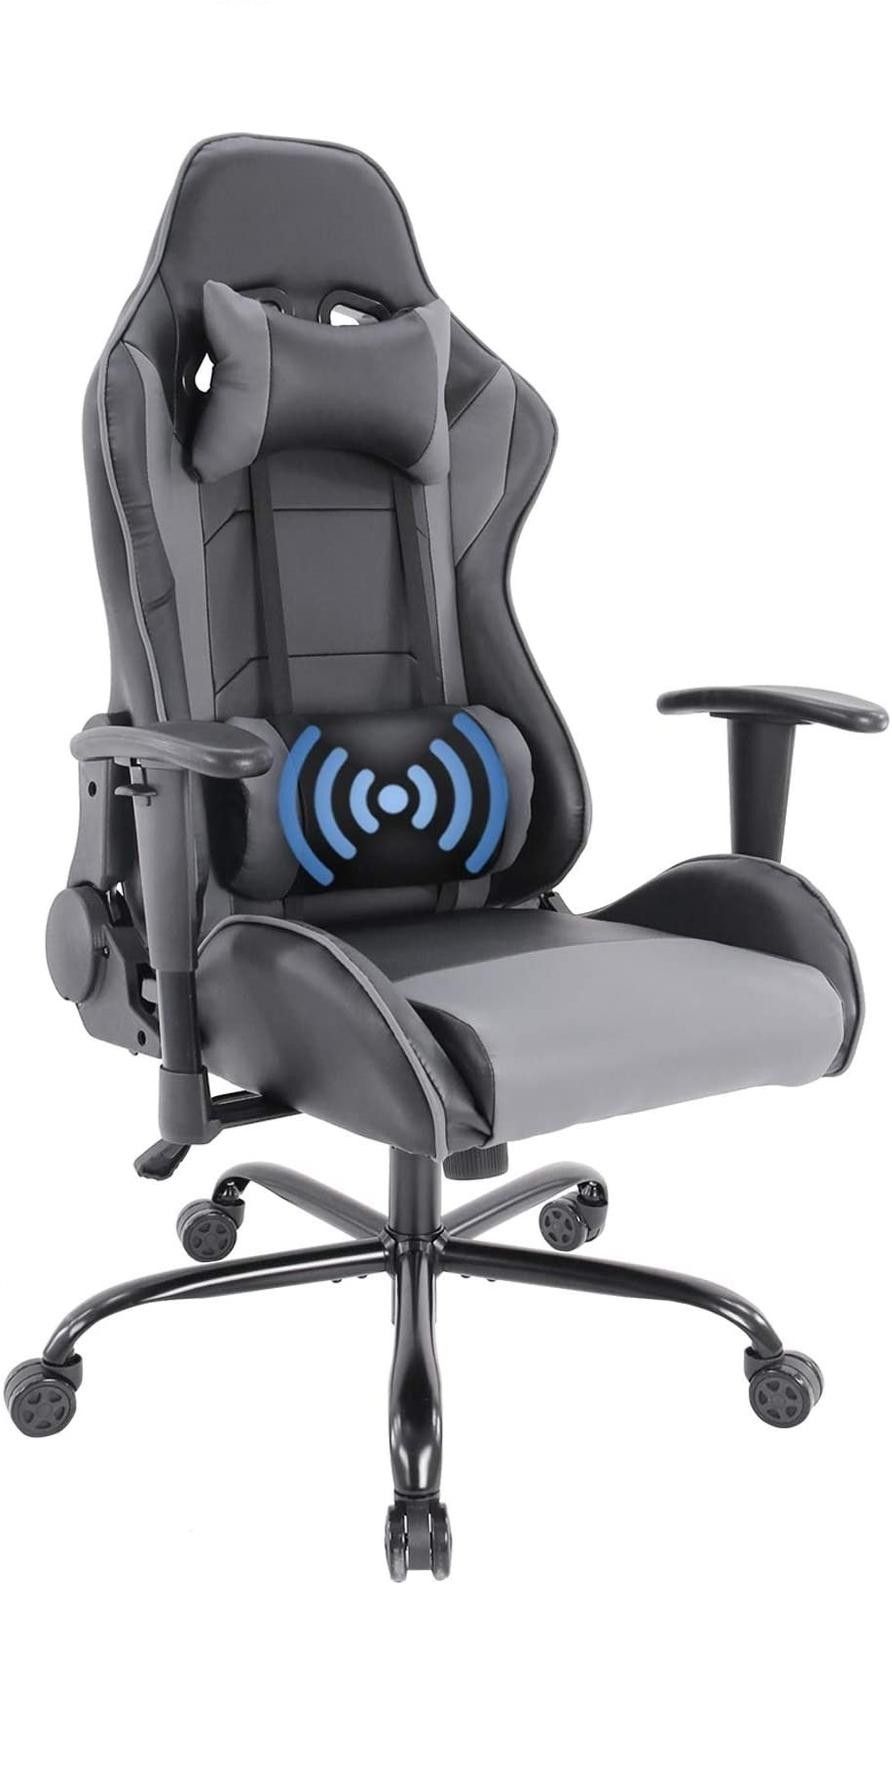 Free Delivery! Ergonomic Massage Computer Gaming Chair with Backrest & Soft Headrest